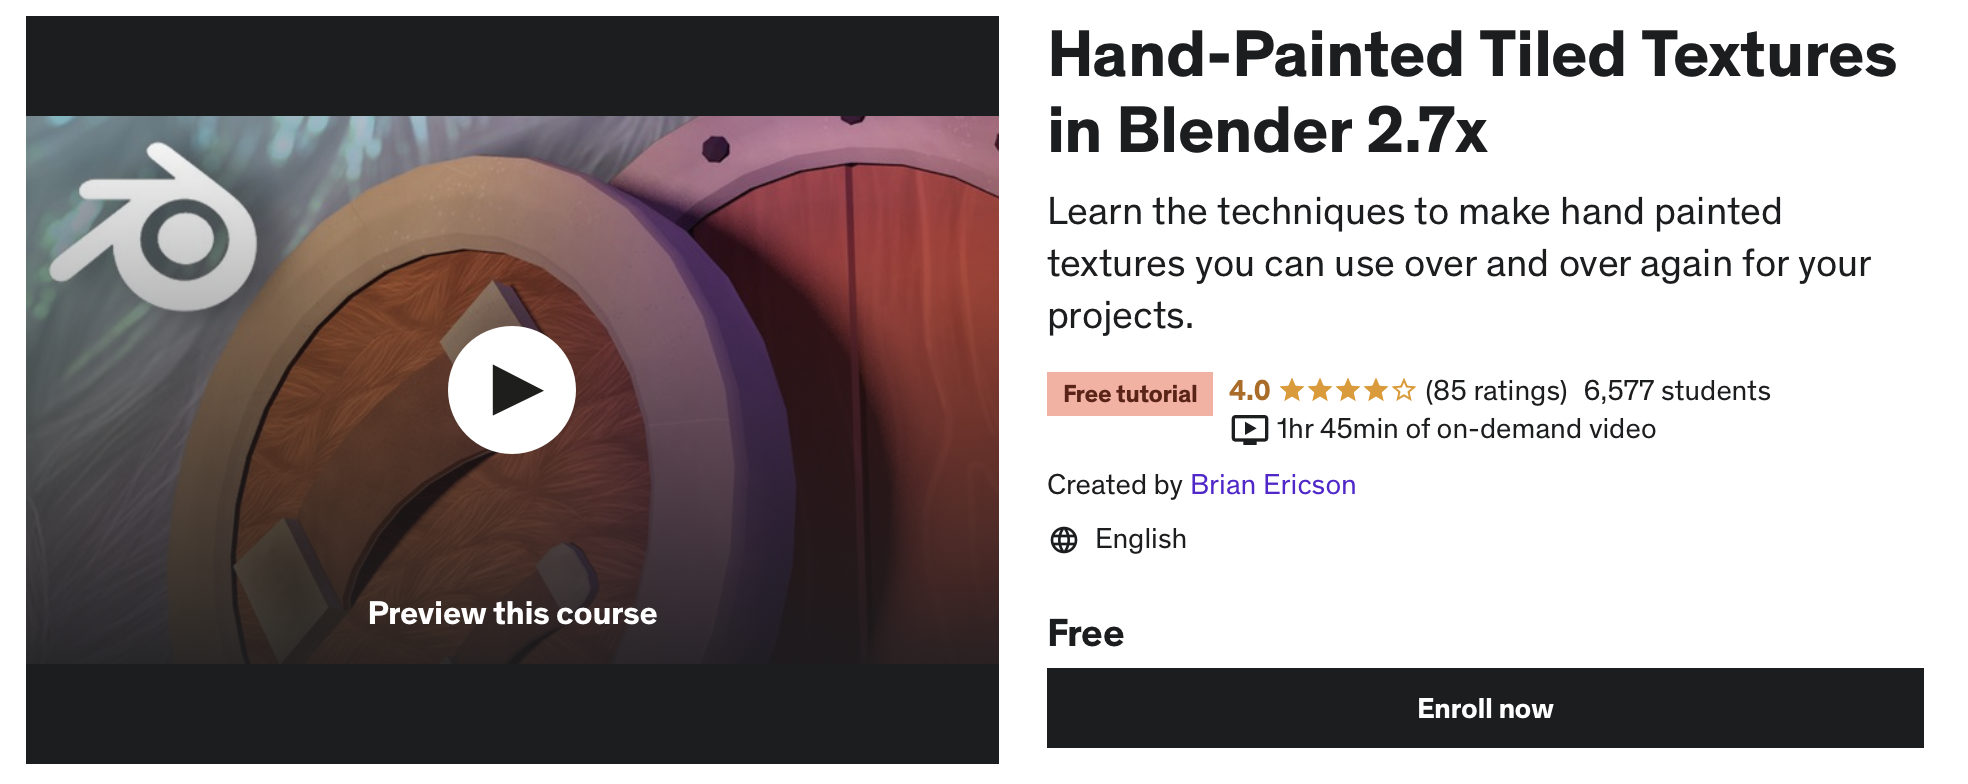 Hand-Painted tiled Textures In Blender 2.7X by Udemy